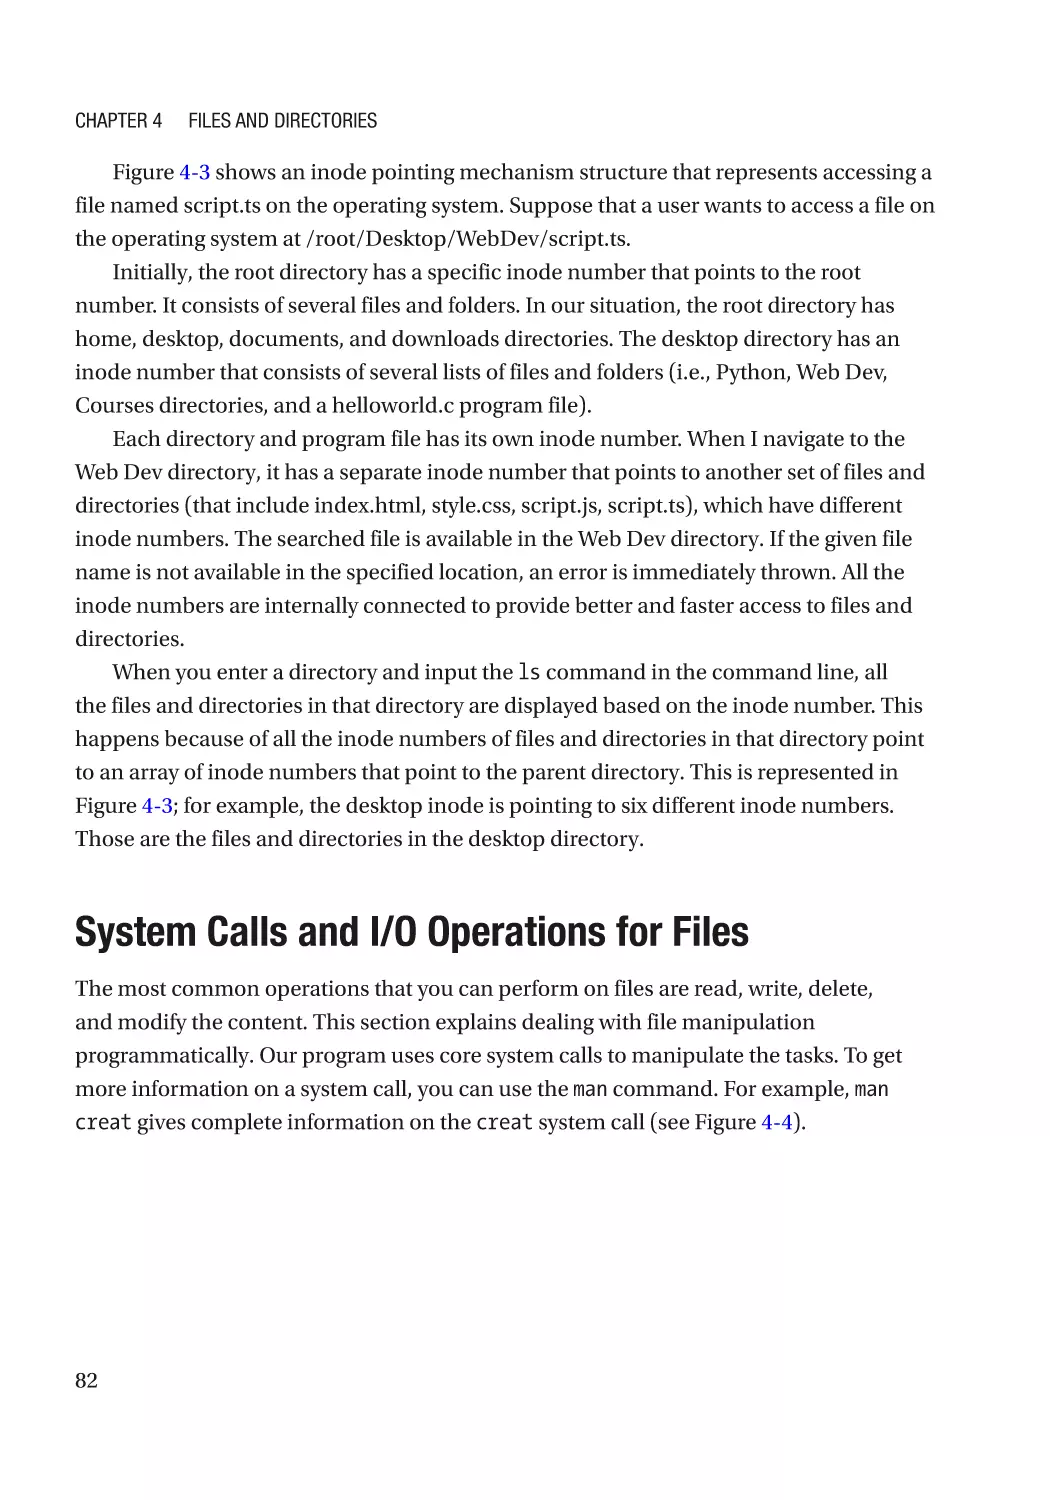 System Calls and I/O Operations for Files